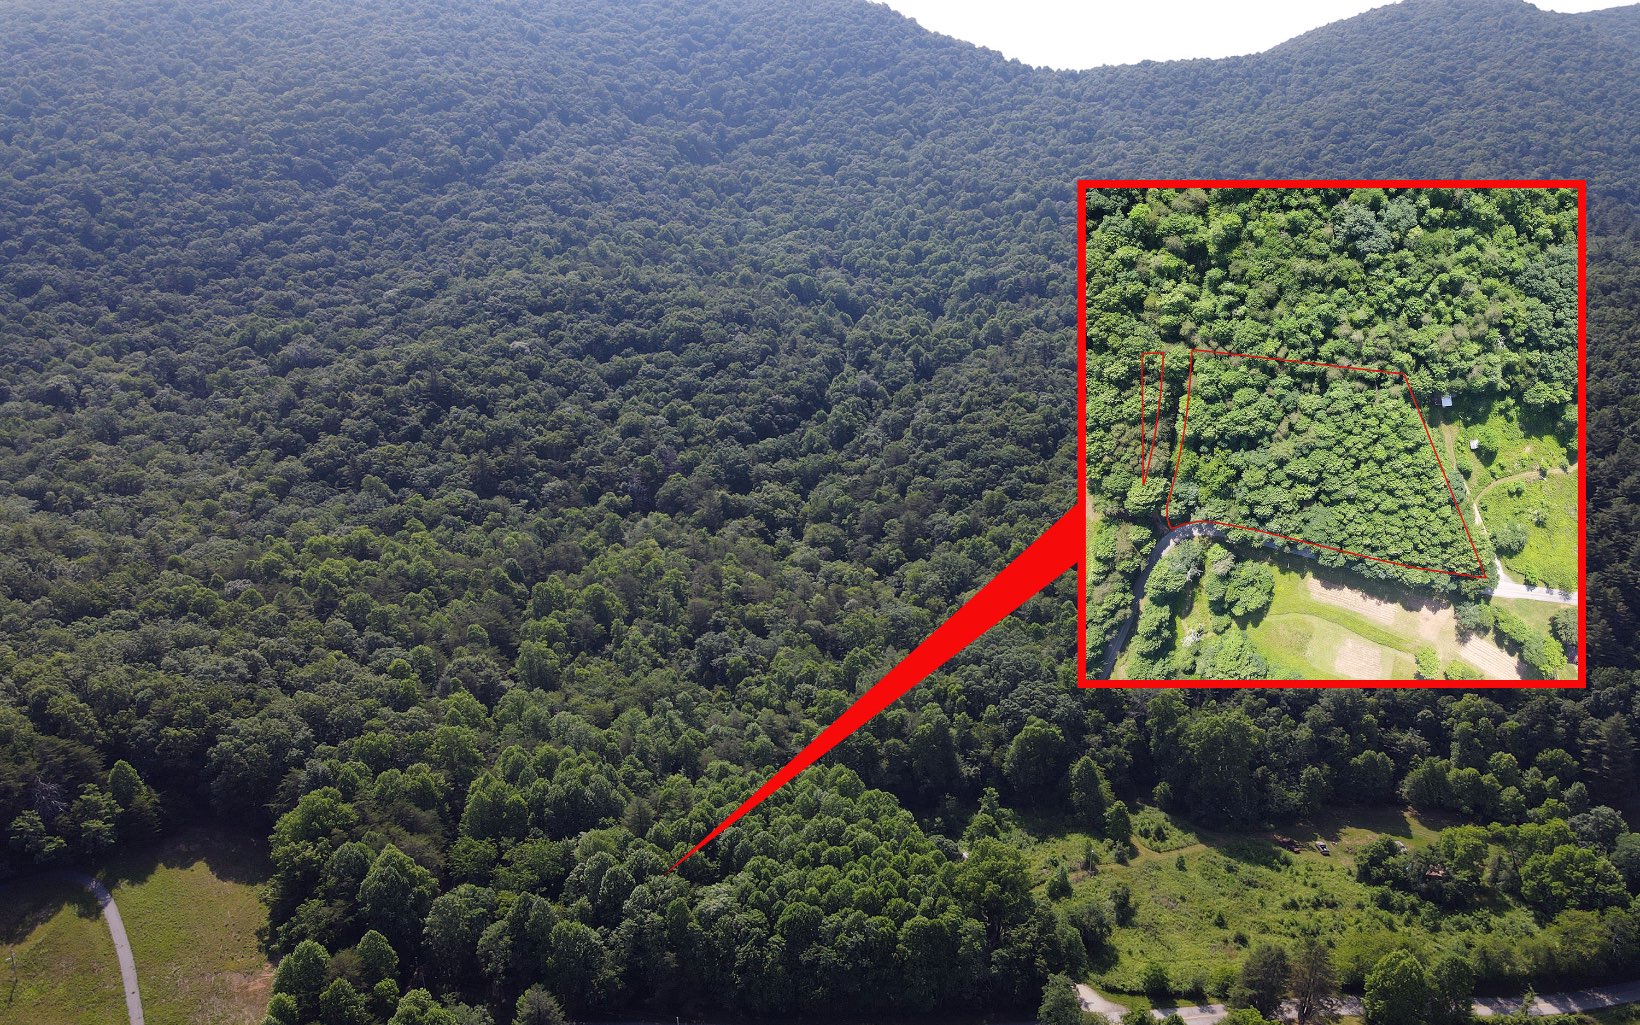 An nice flat easy build lot full of cedar trees. The entire north side of the property abuts Glen Elliott Road giving access to an additional 17.1 acres surrounded by national forest.